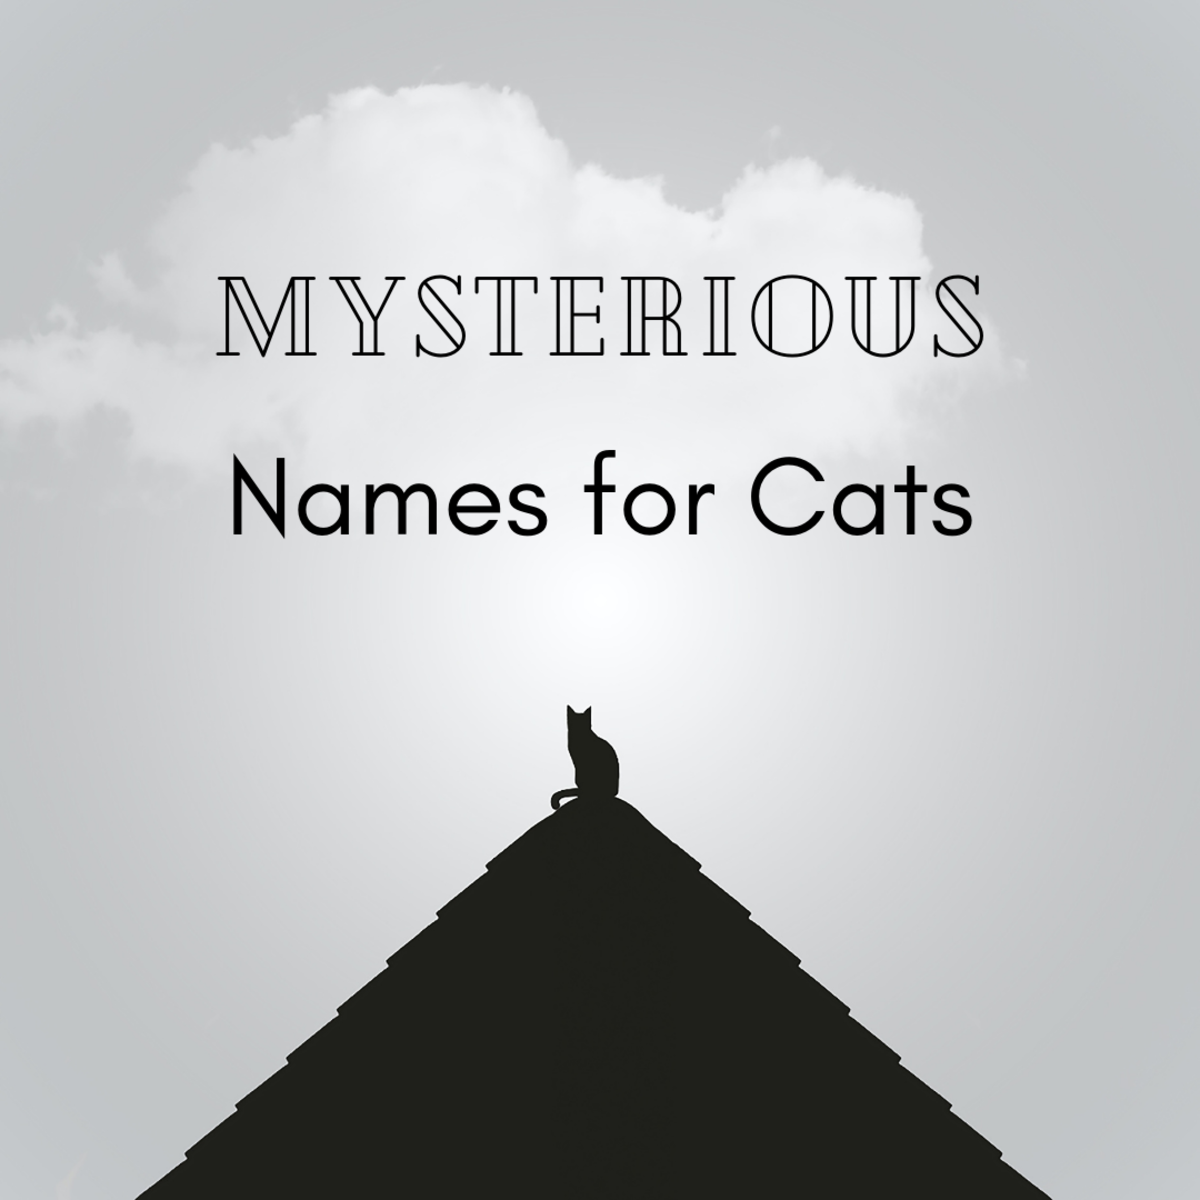 150 Mysterious Names for Cats